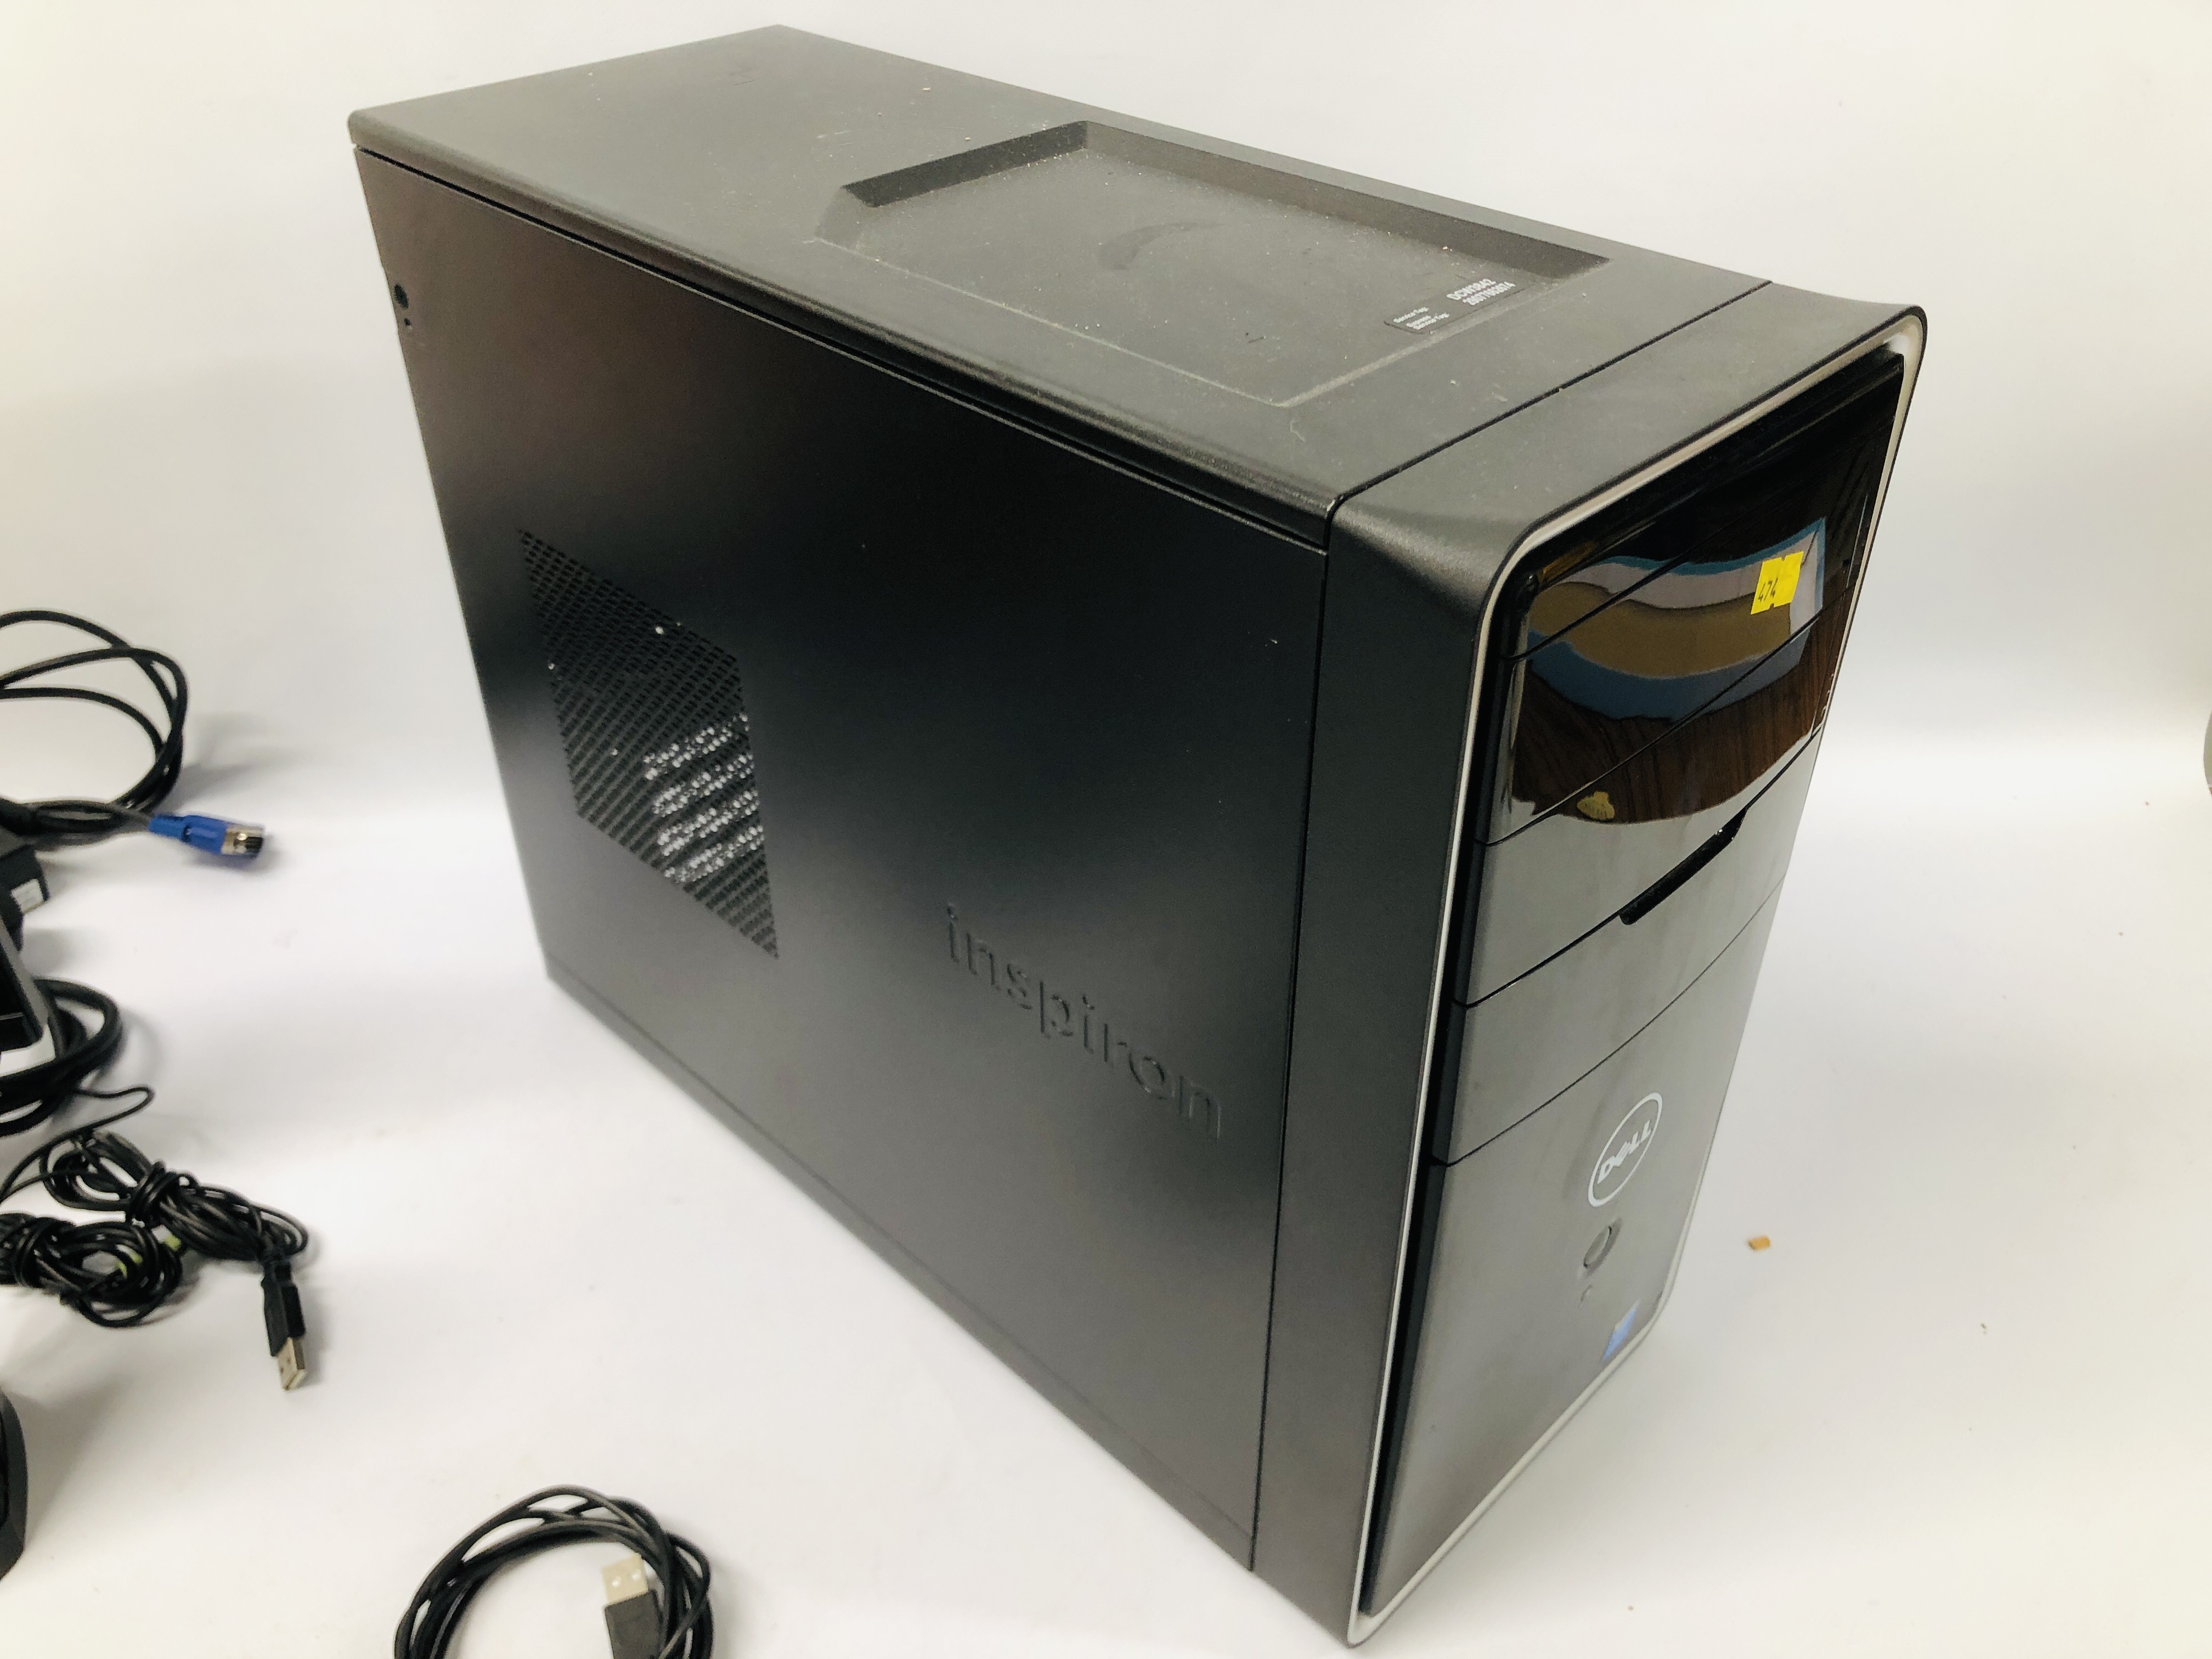 A DELL DESKTOP COMPUTER SYSTEM (HARD DRIVE REMOVED) - SOLD AS SEEN - Image 2 of 8